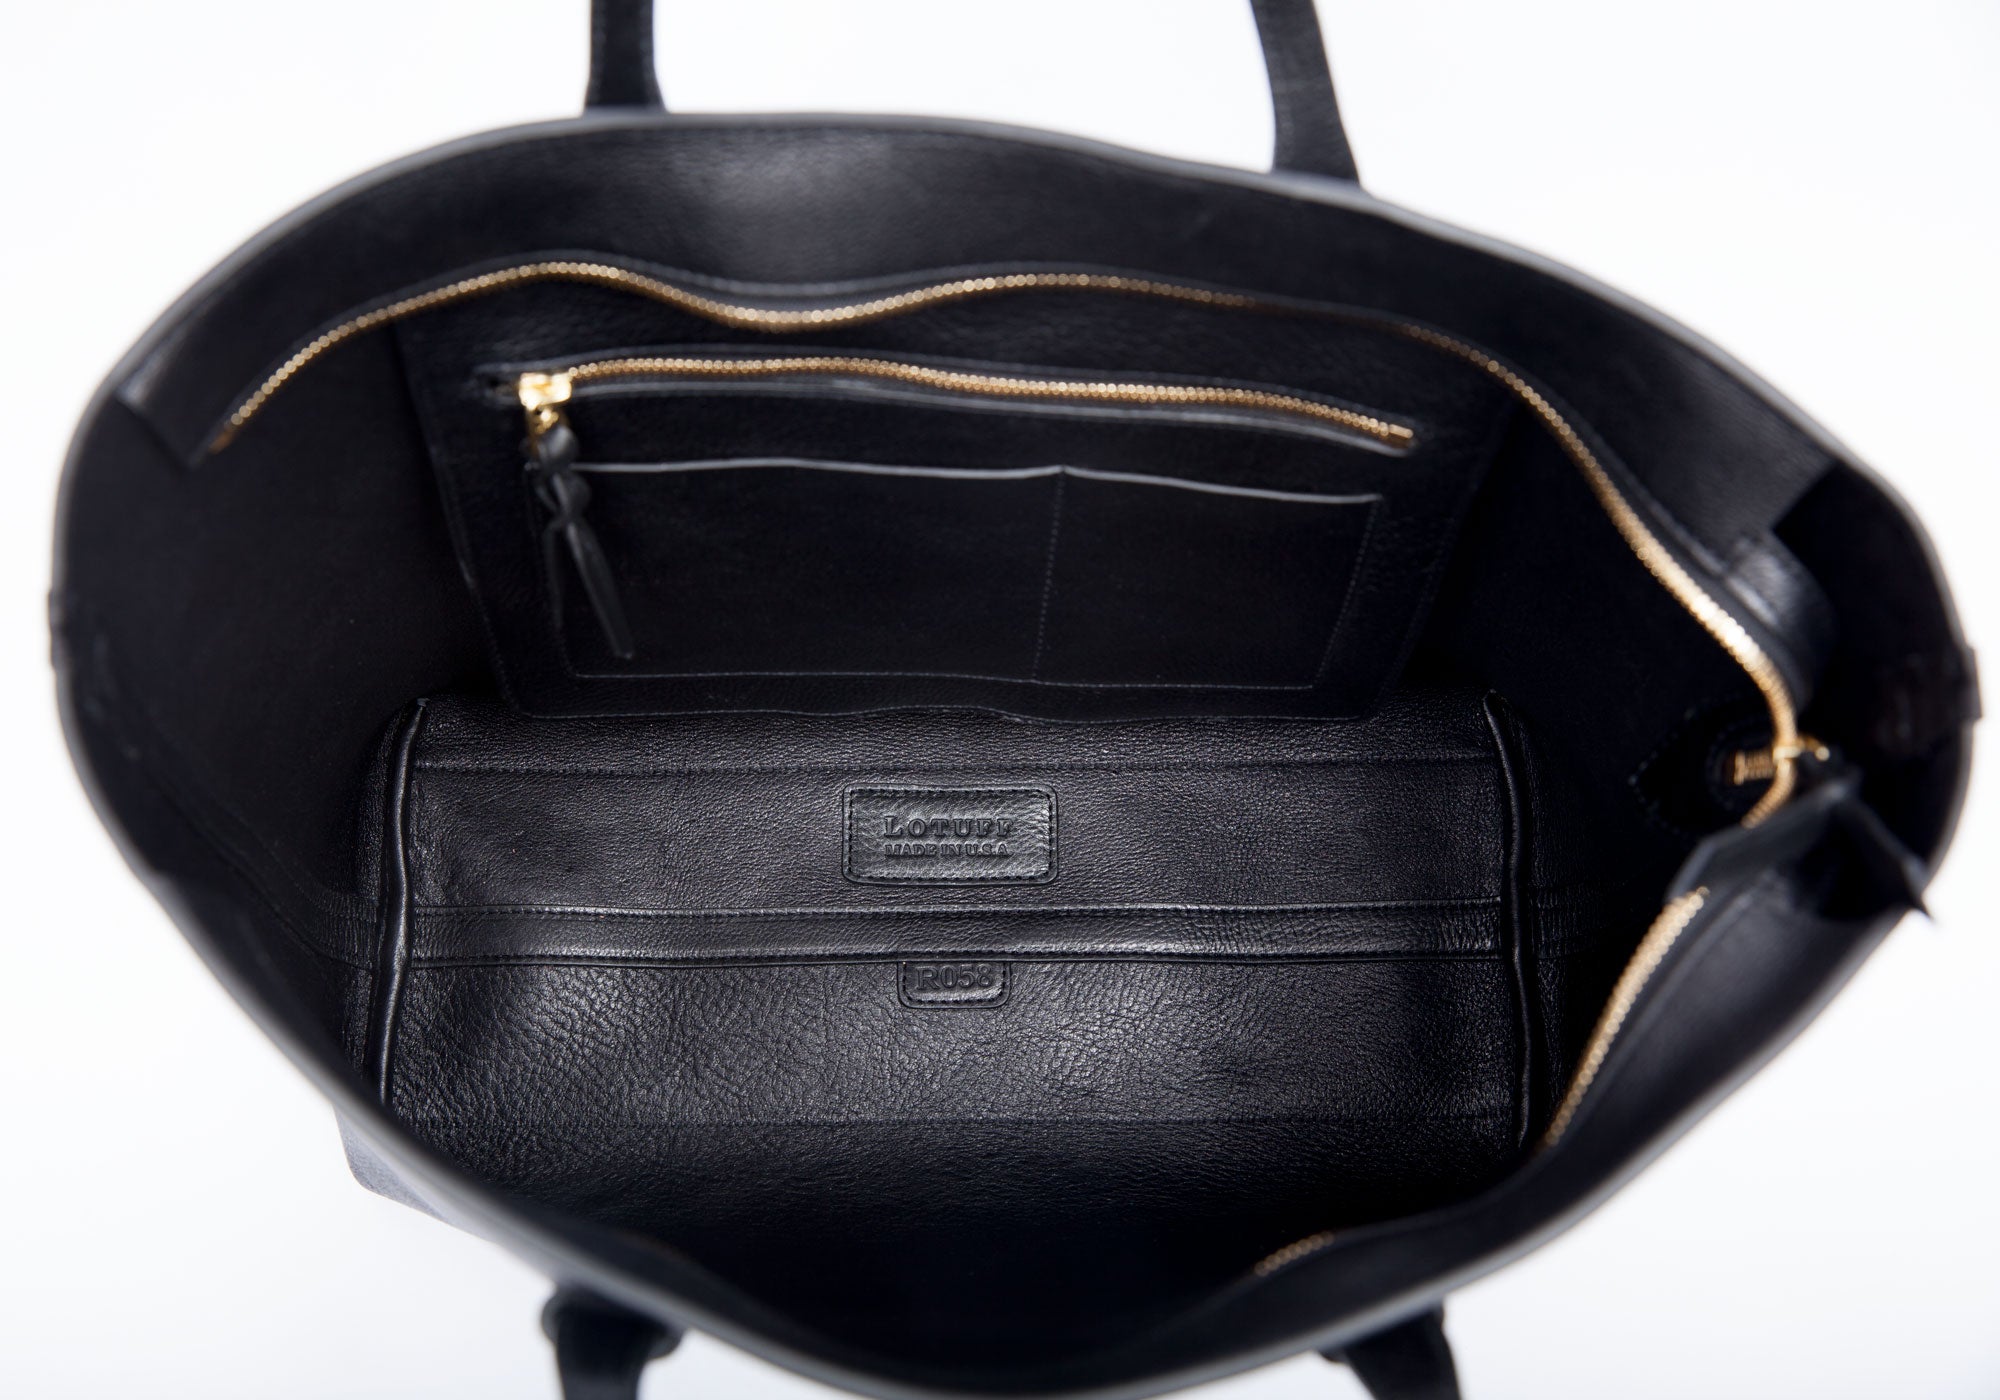 Inner Leather View of No. 12 Leather Tote Black